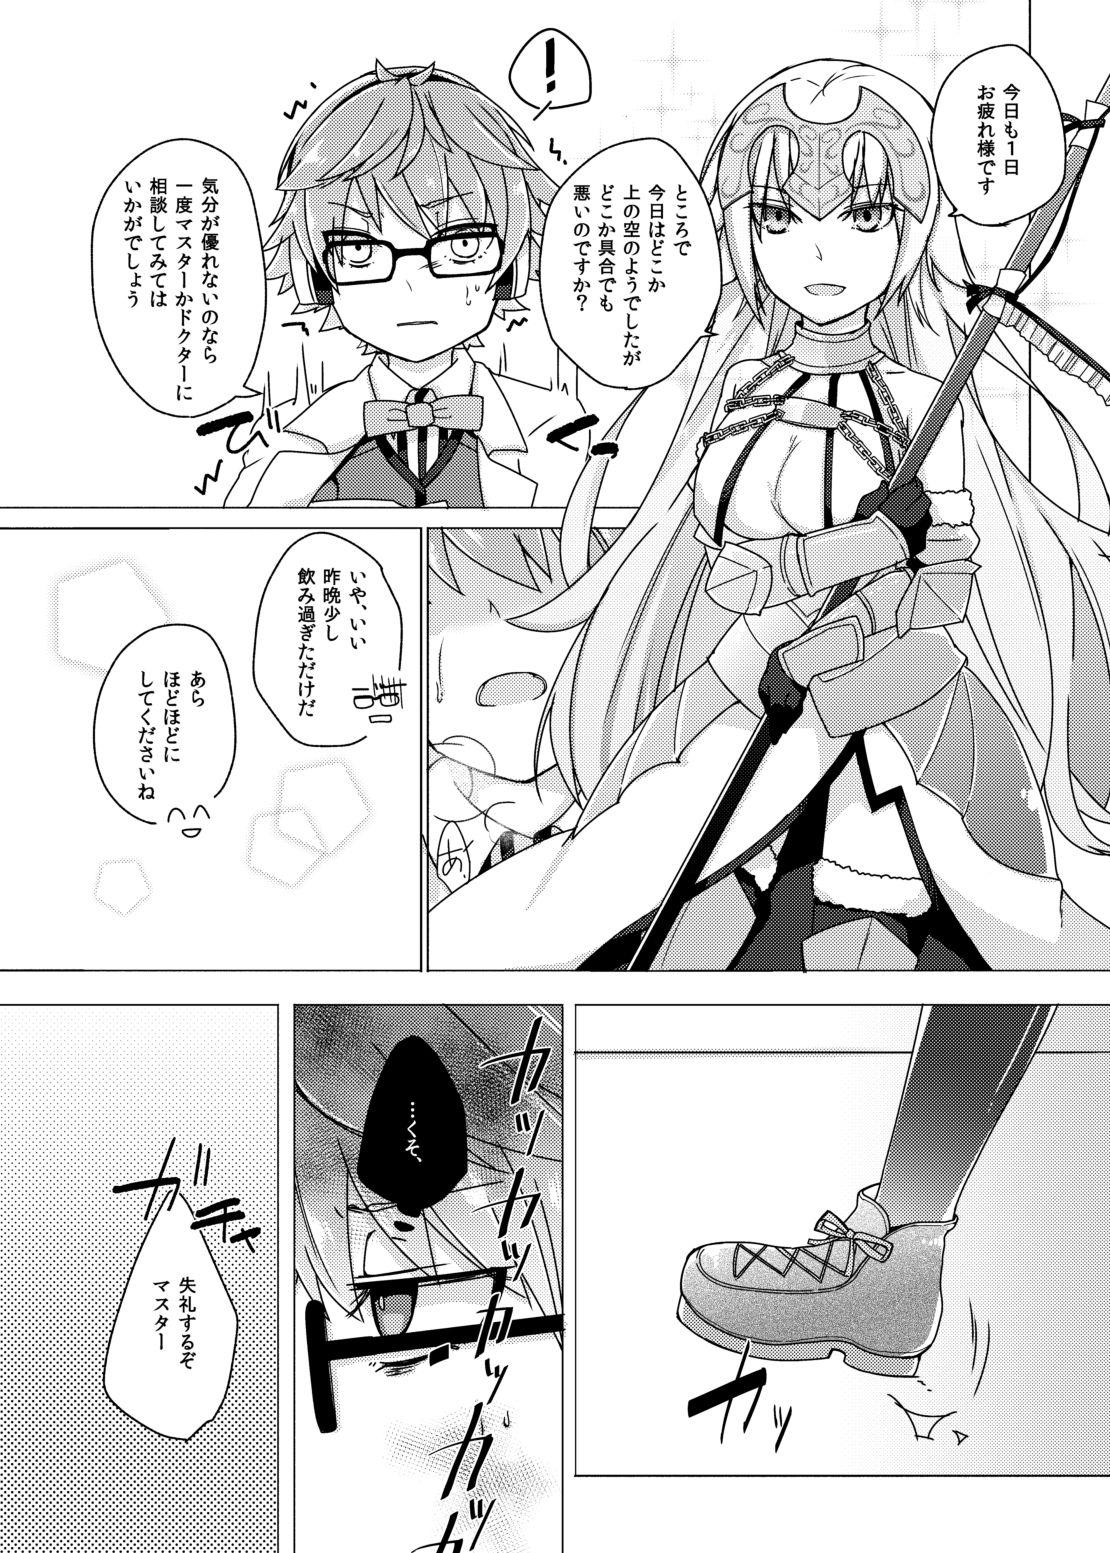 Que ぐだデル寄稿まんが再録 - Fate grand order Eurobabe - Page 2